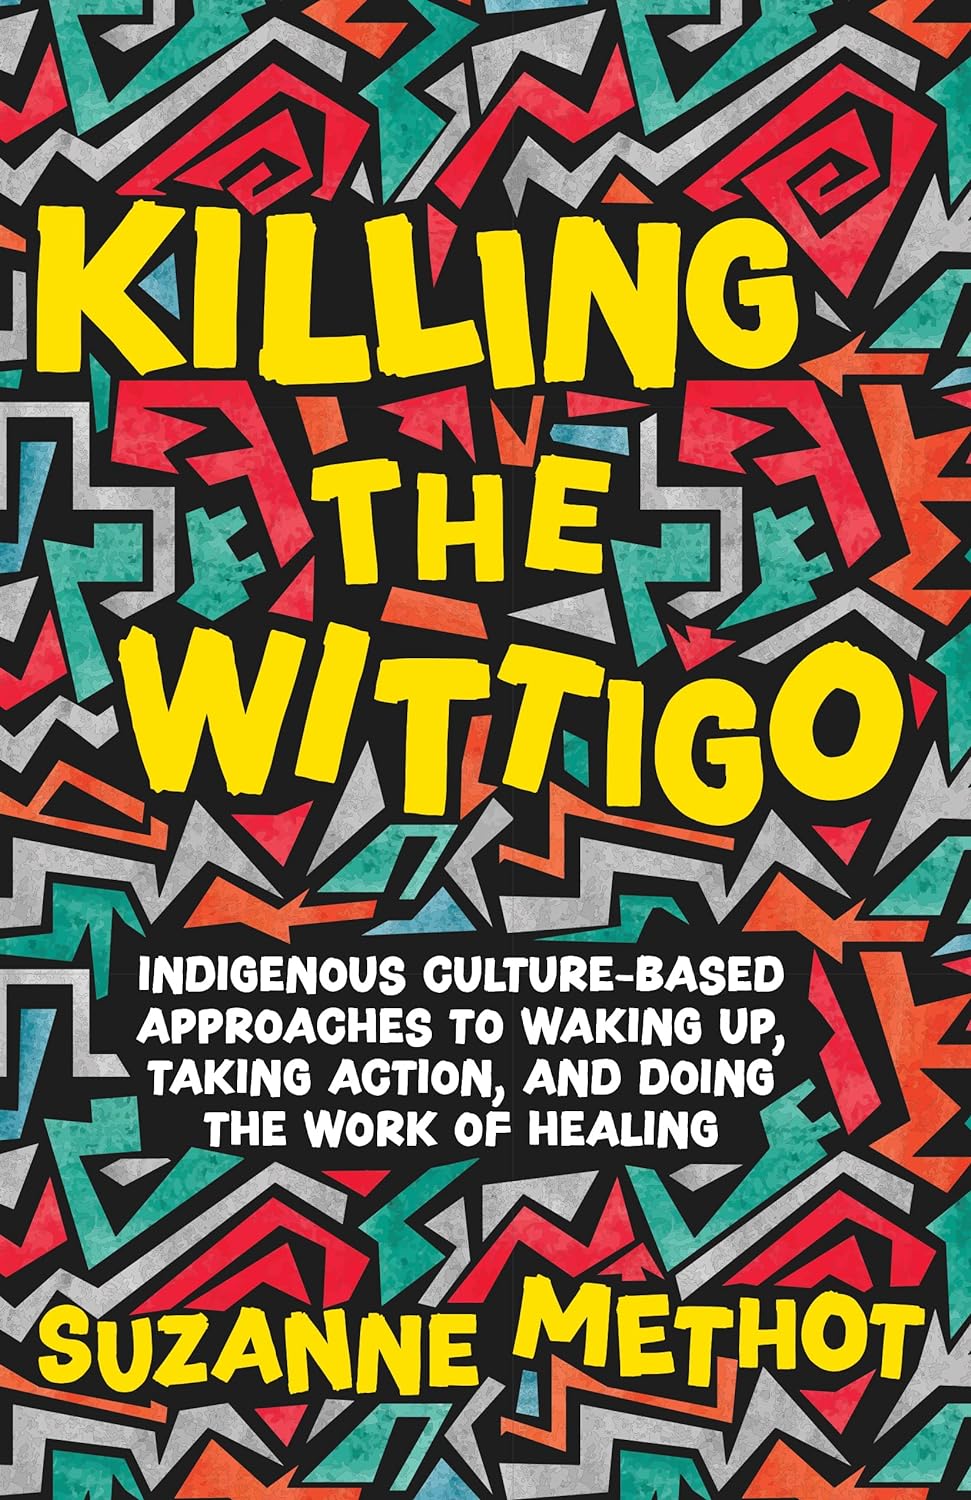 Killing the Wittigo: Indigenous Culture-Based Approaches to Waking Up, Taking Action, and Doing the Work of Healing by Suzanne Methot